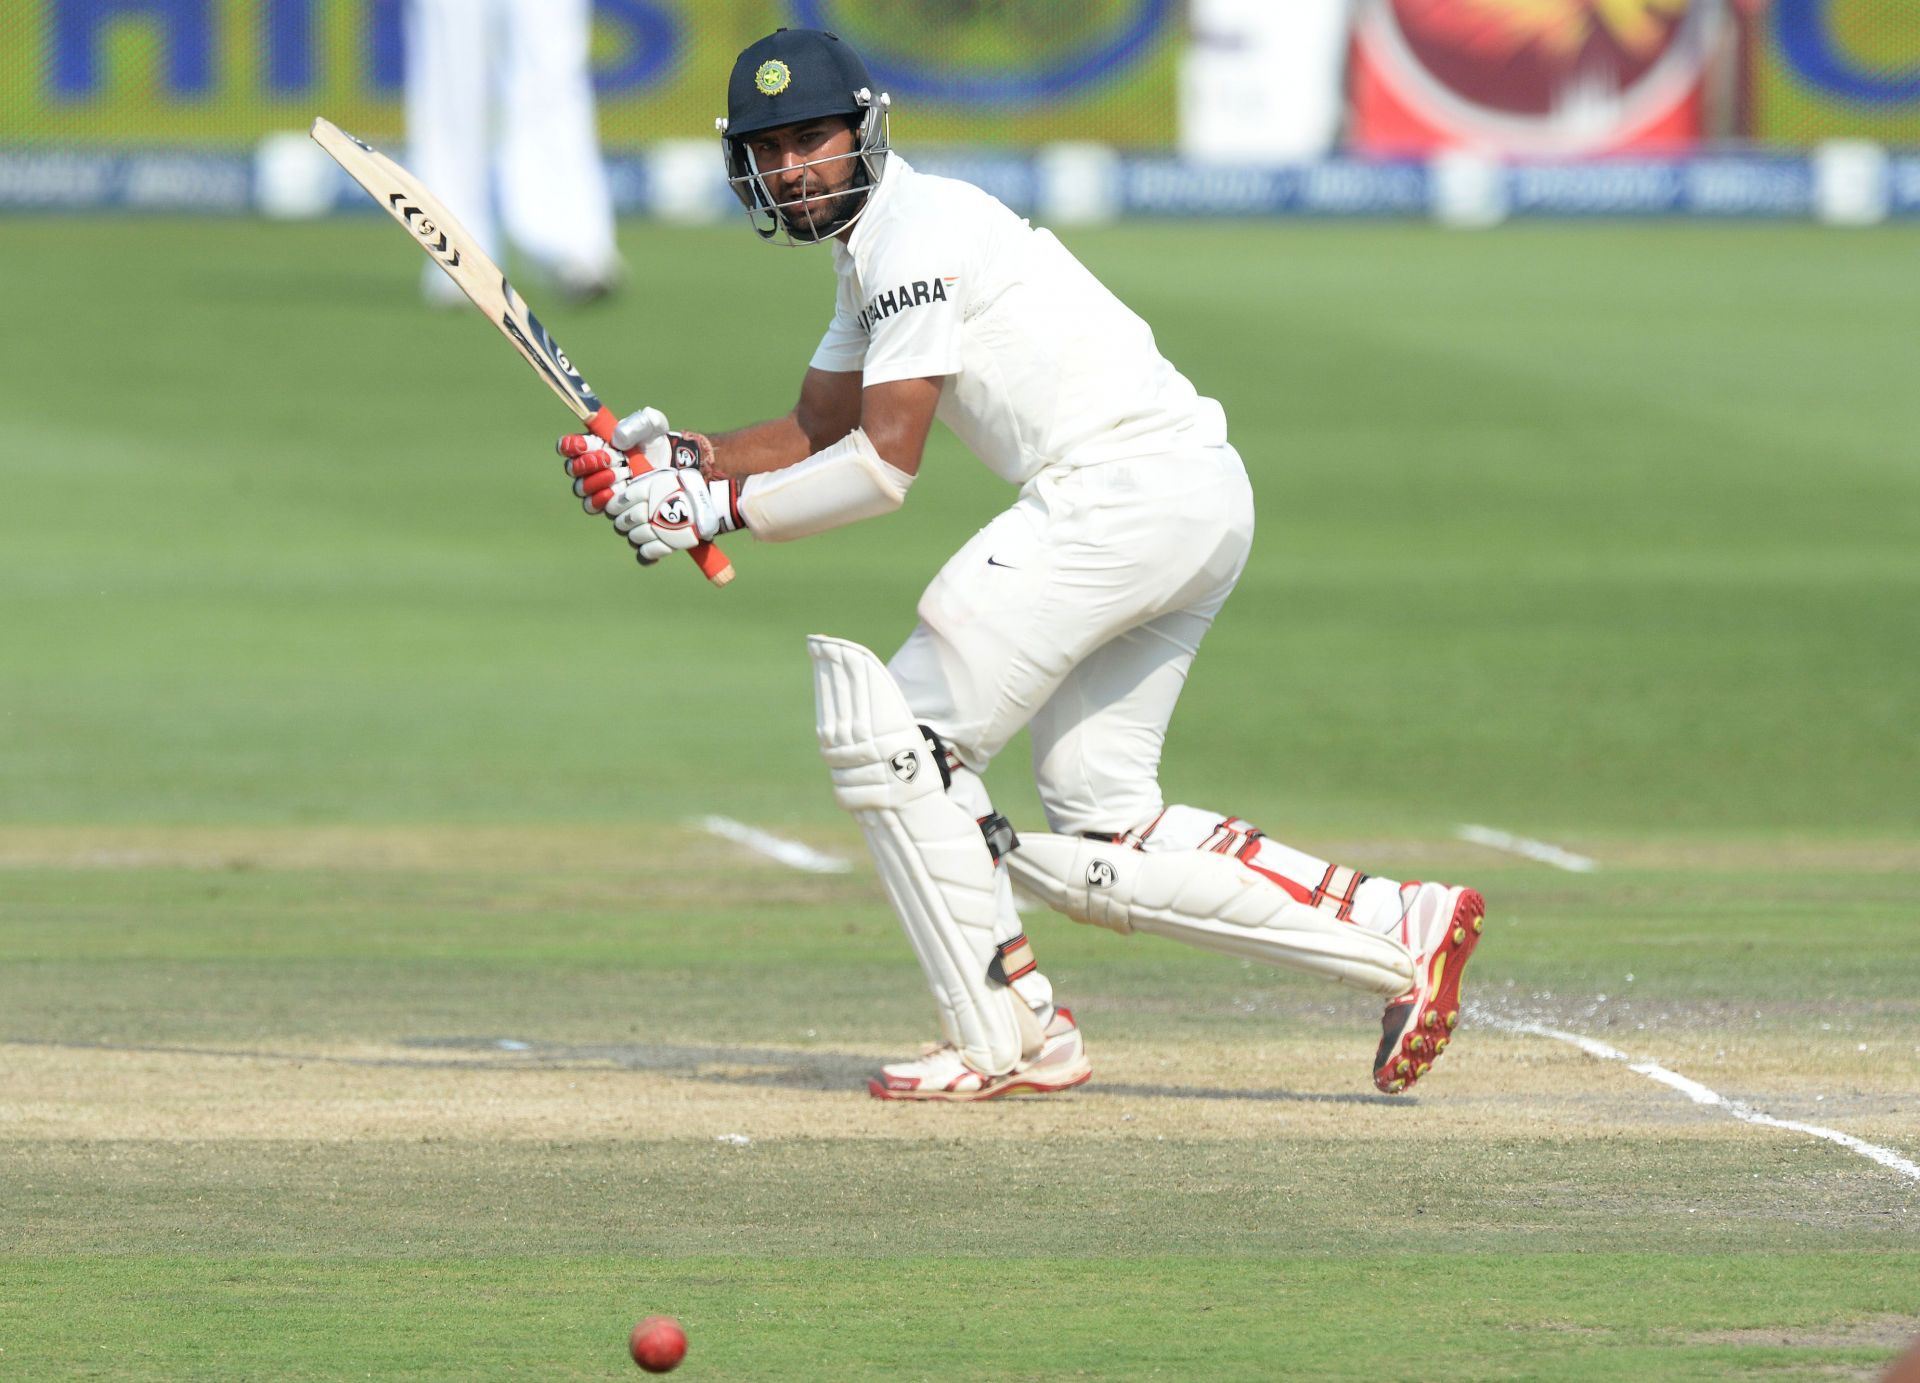 The defiant Indian batter during the December 2013 Johannesburg Test. Pic: Getty Images